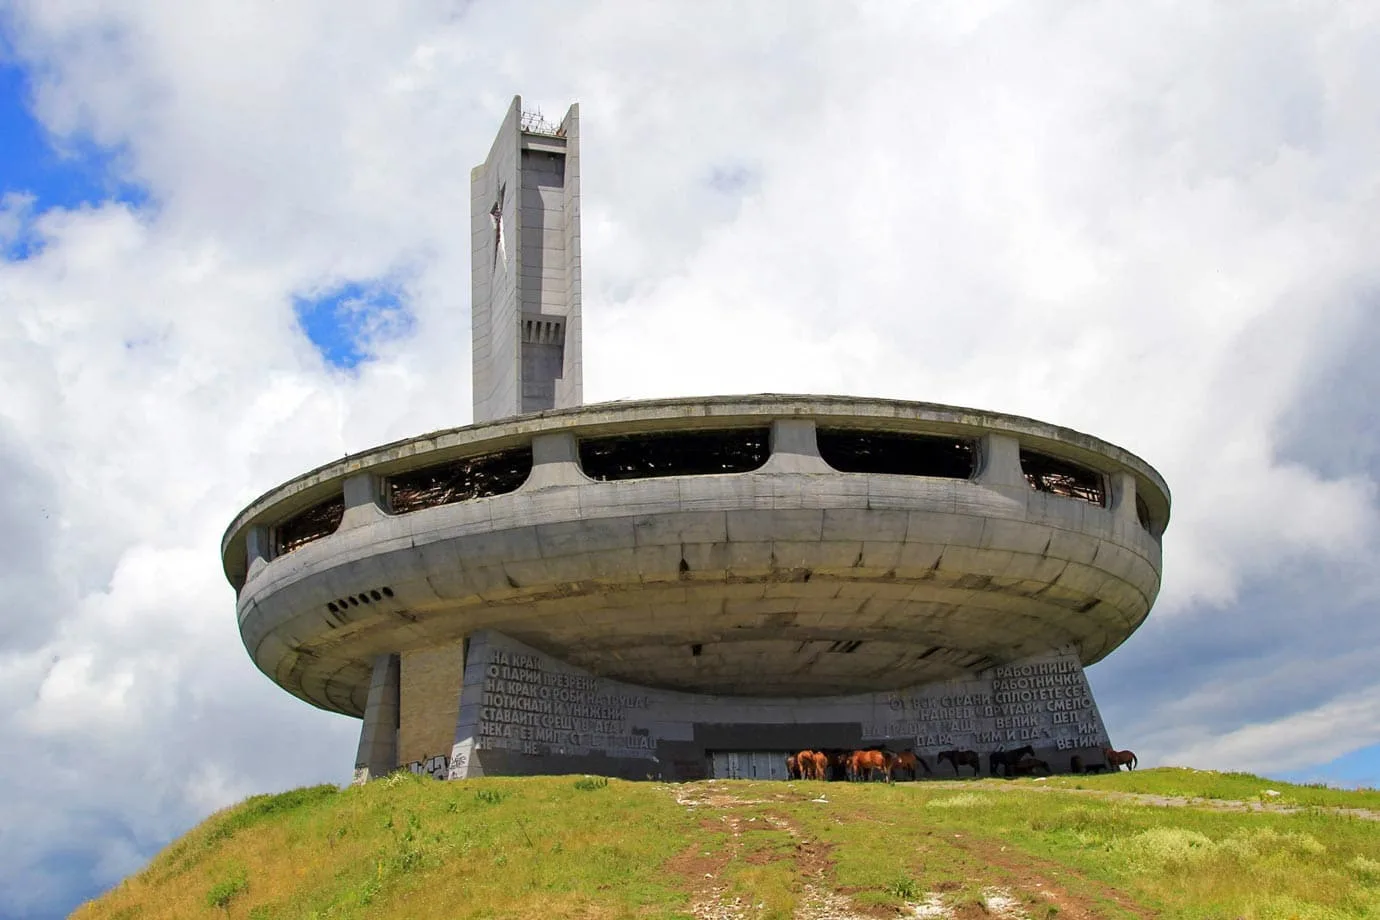 Buzludzha was one of the most extravagant monuments I have ever seen